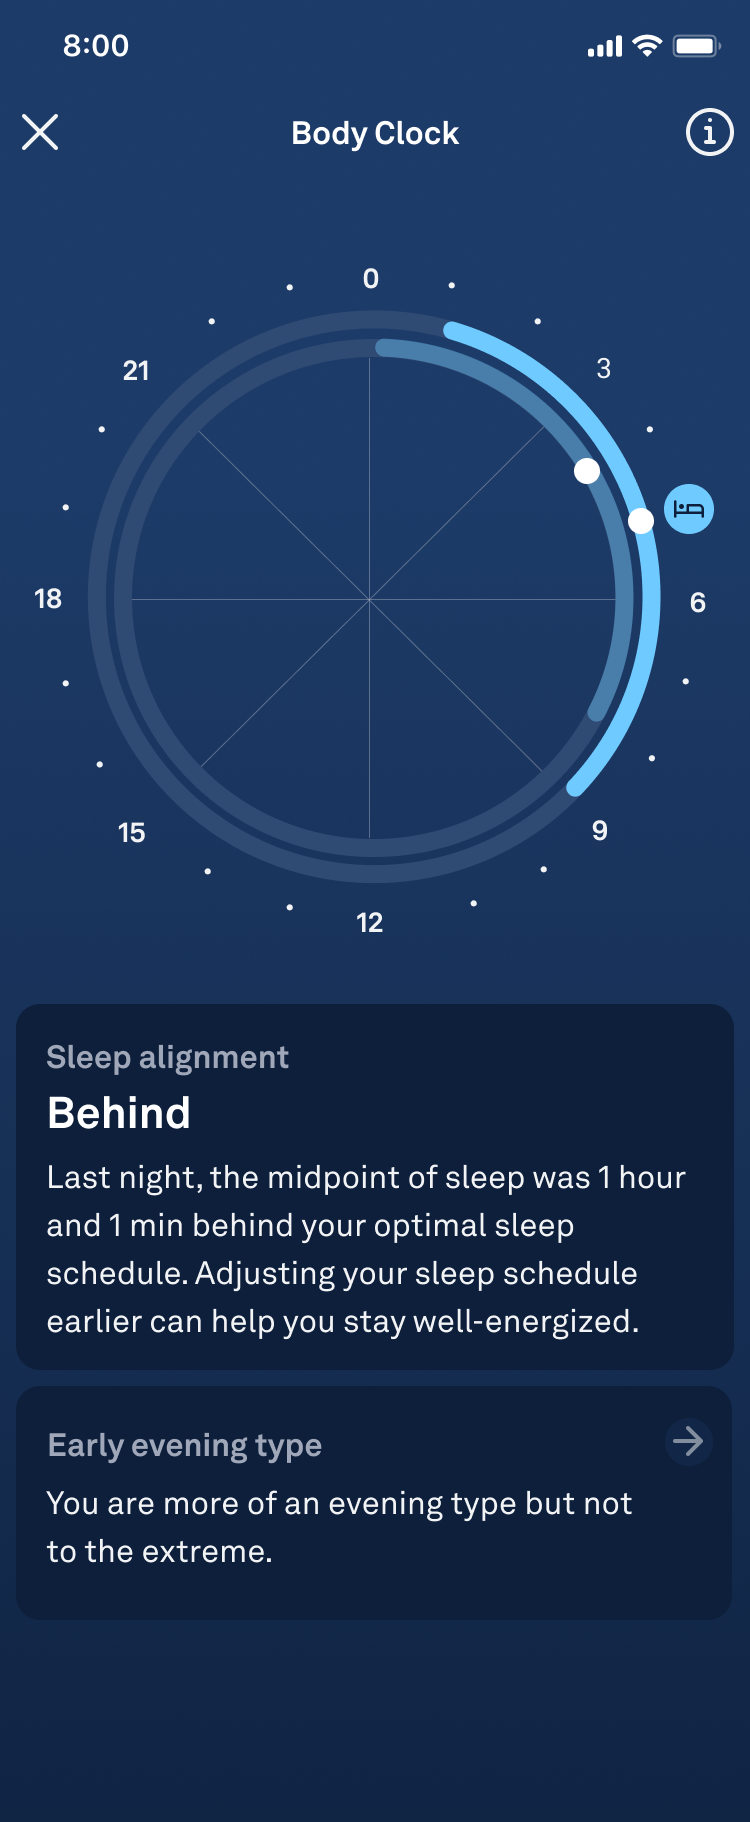 an expanded view of the Body Clock, with additional information on alignment and chronotype